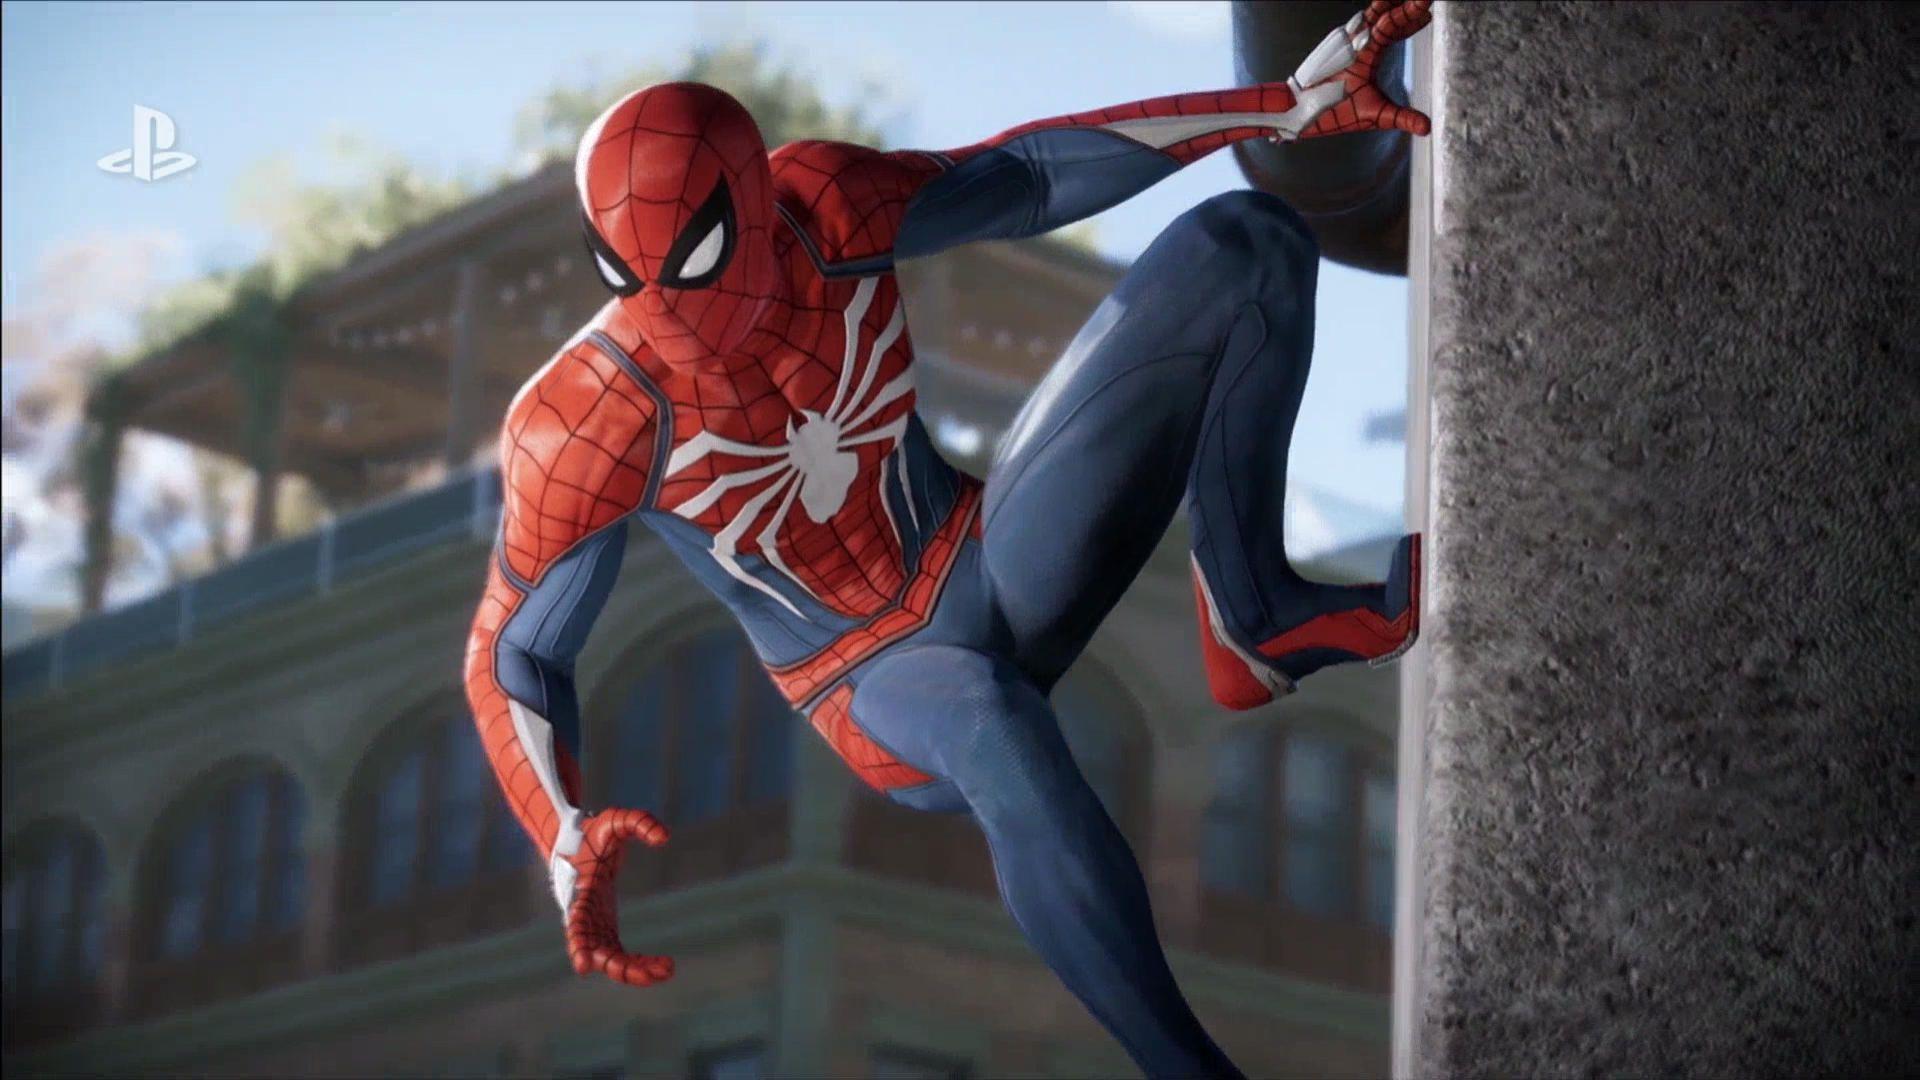 Look Out! Here Comes The Spider Man (game)